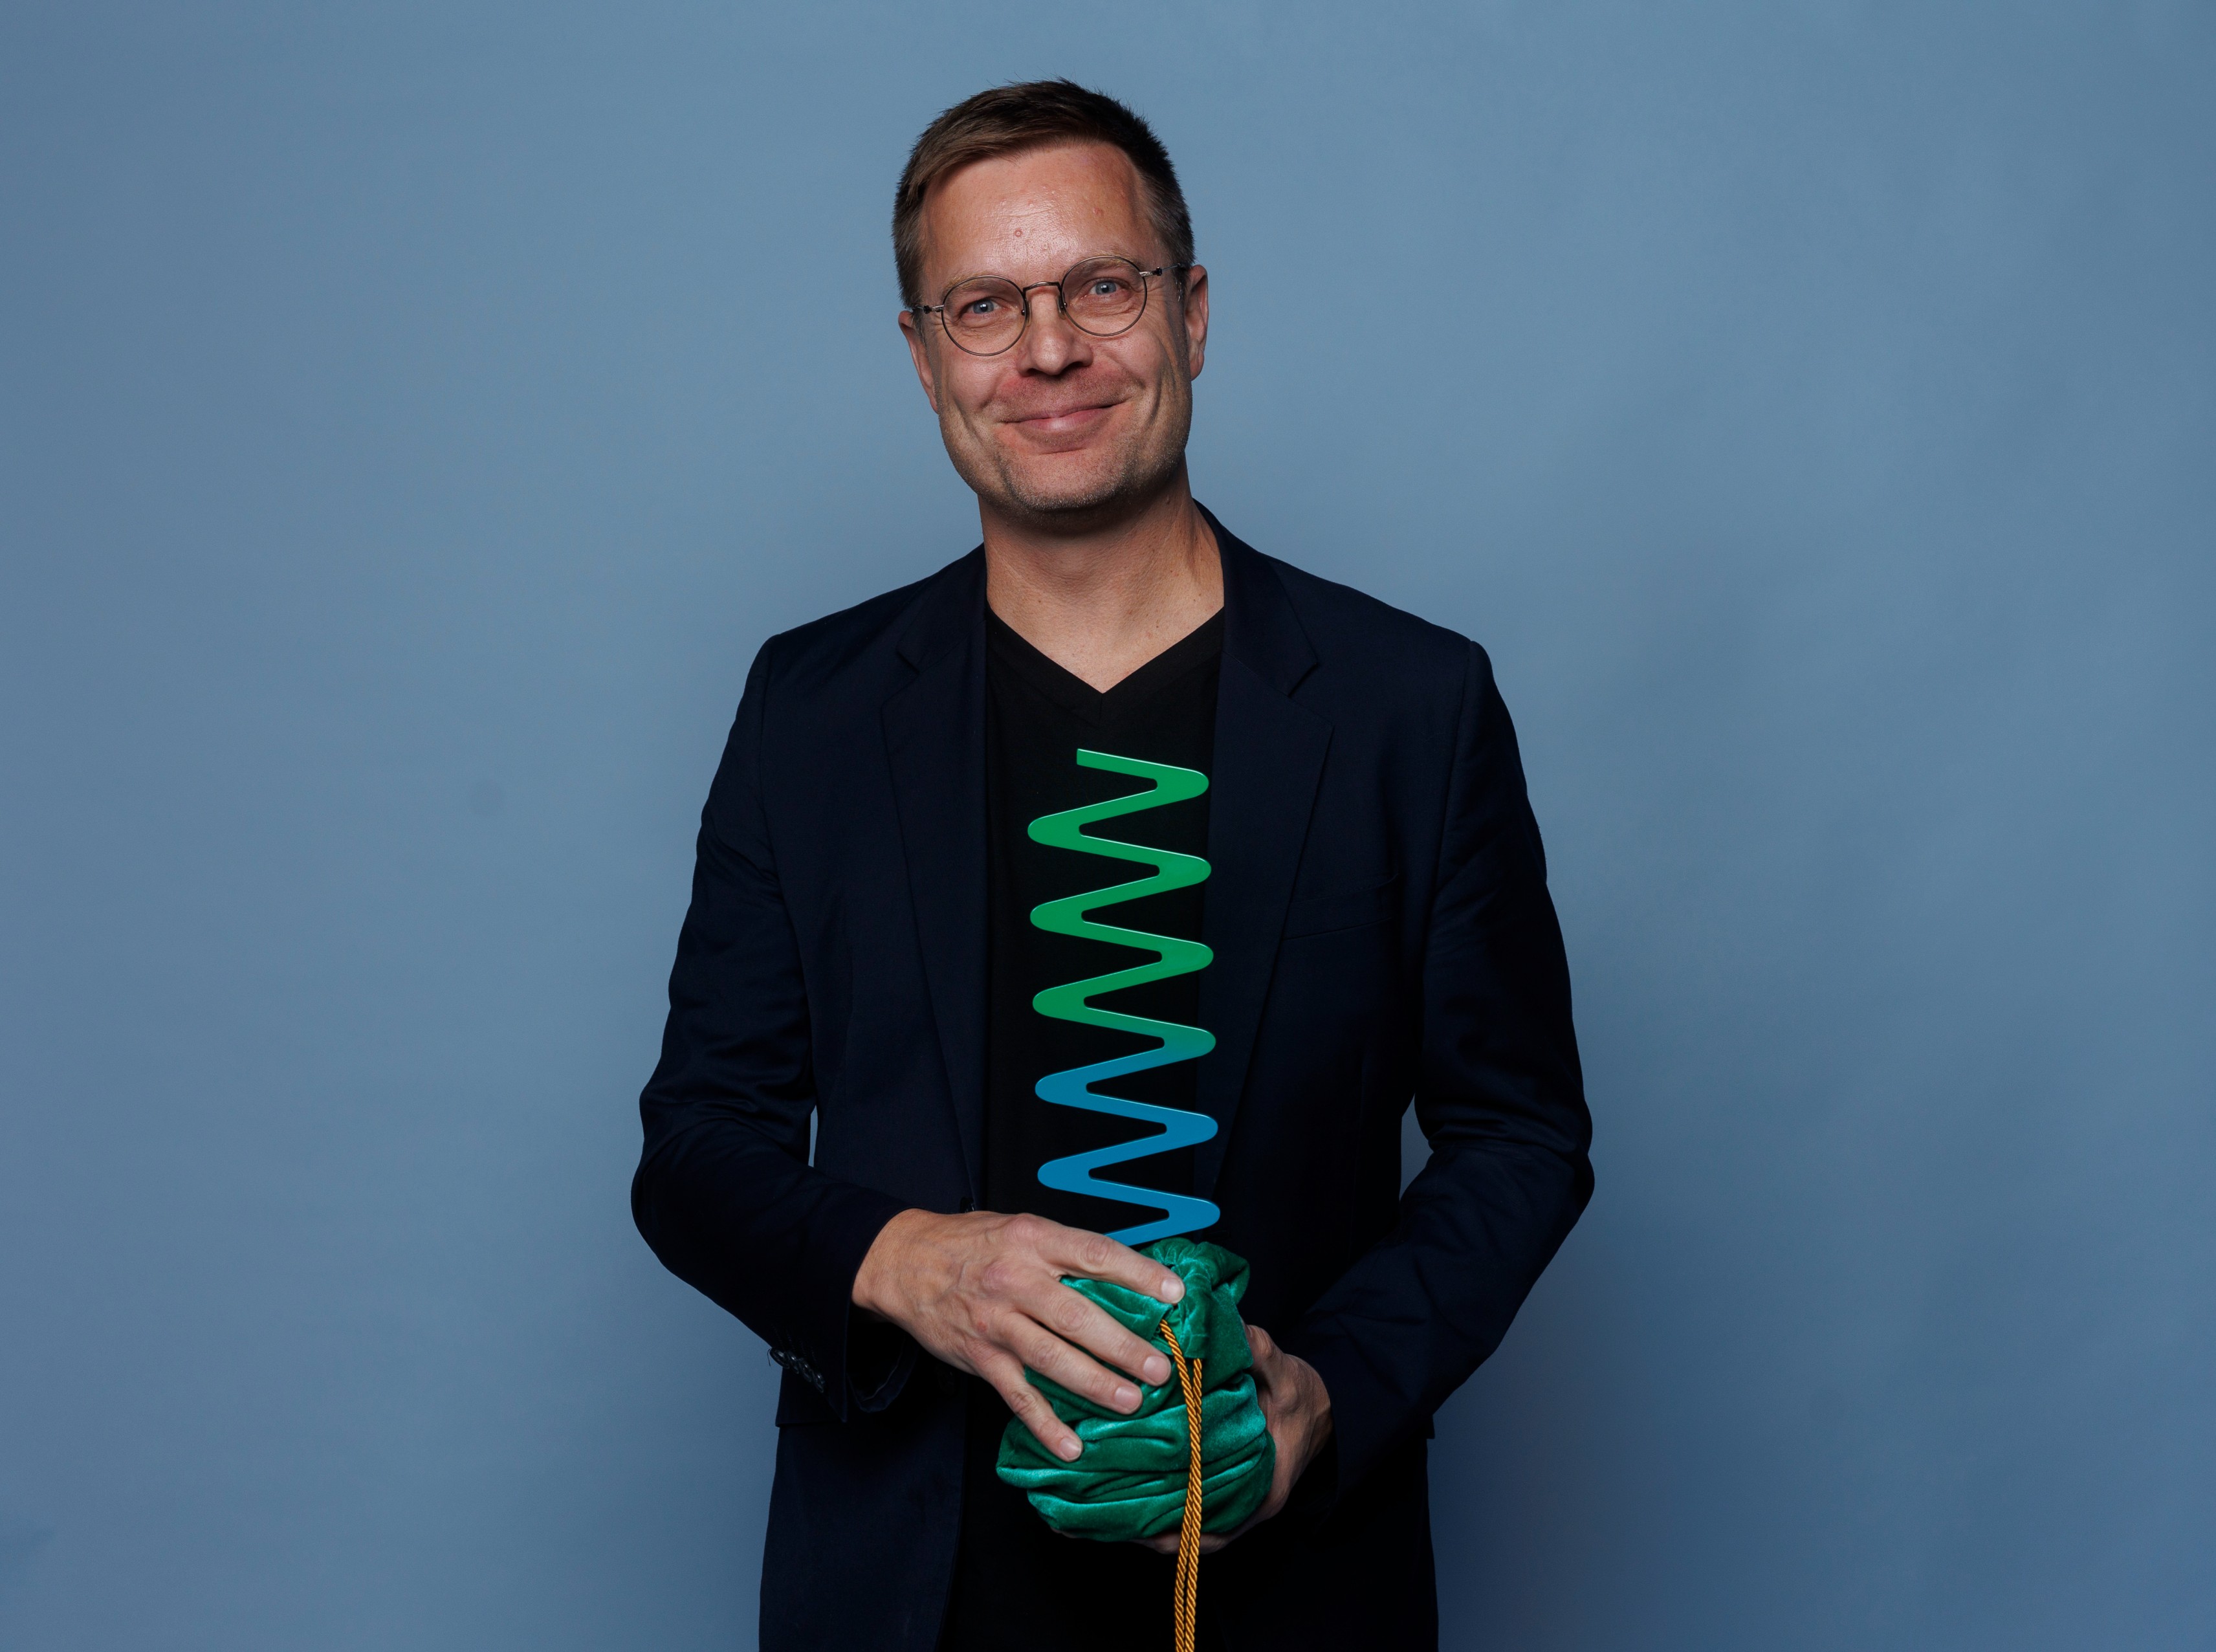 Troy Gronsdahl - White male wearing large, thin-rimmed glasses and a black shirt smiling while holding a green wavelength award in a velvet green pouch gathered at the base of the award.